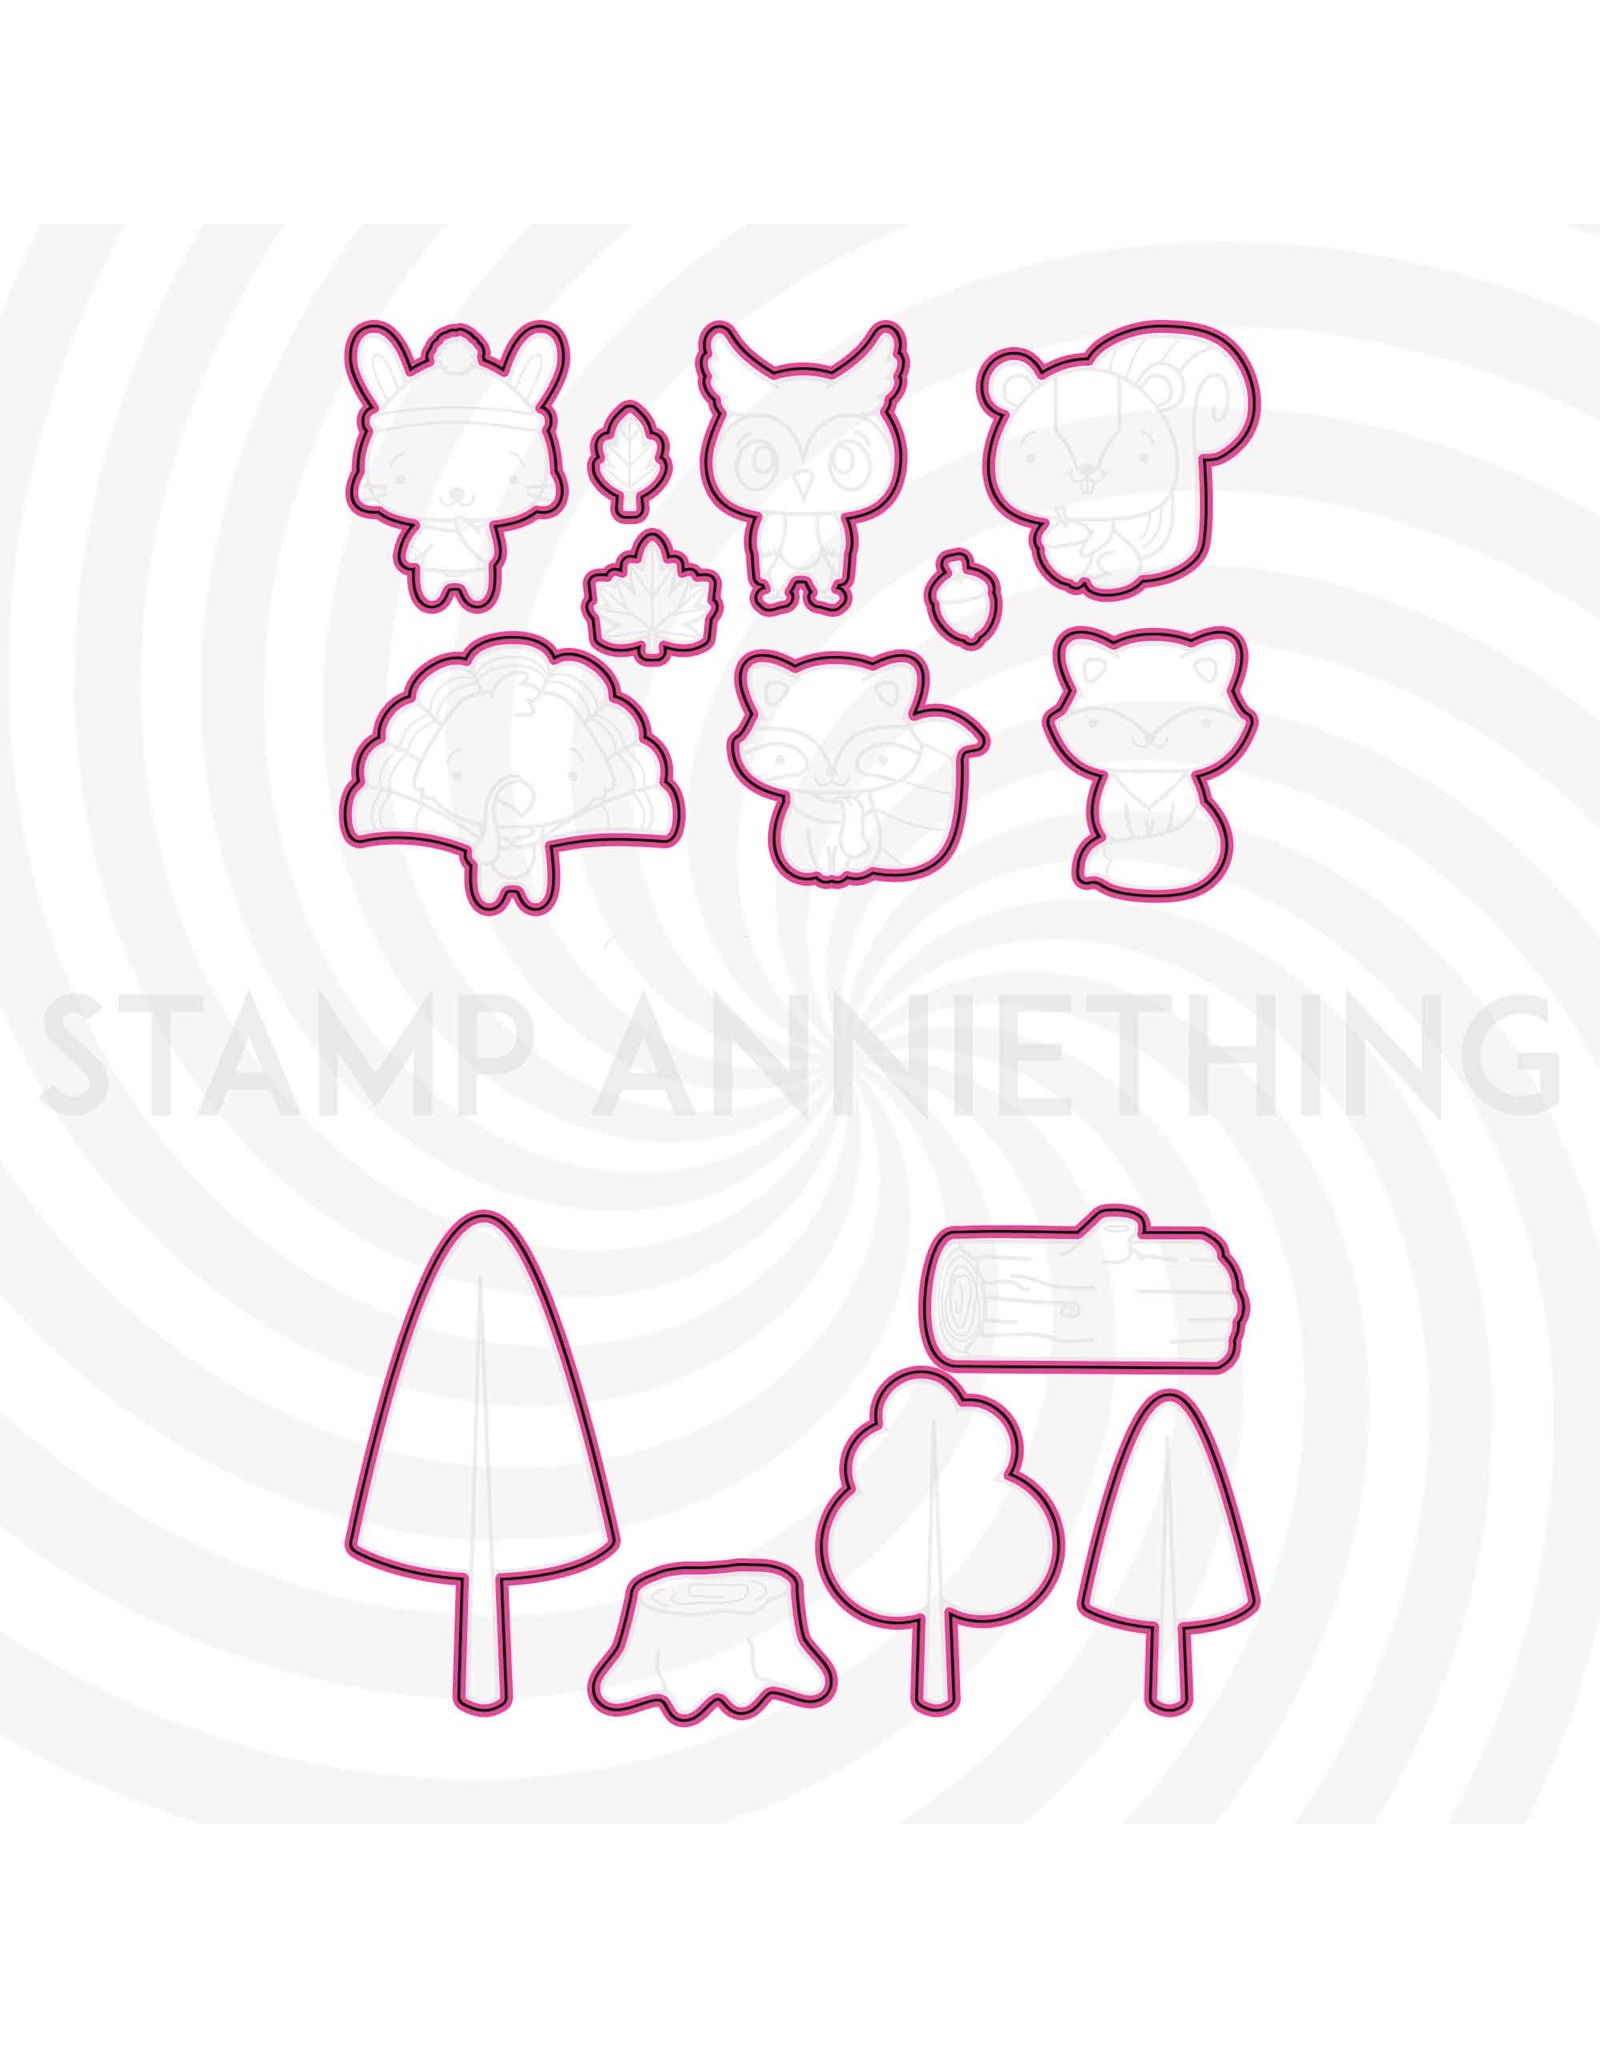 Stamp Anniething Let's Gather Outline Dies